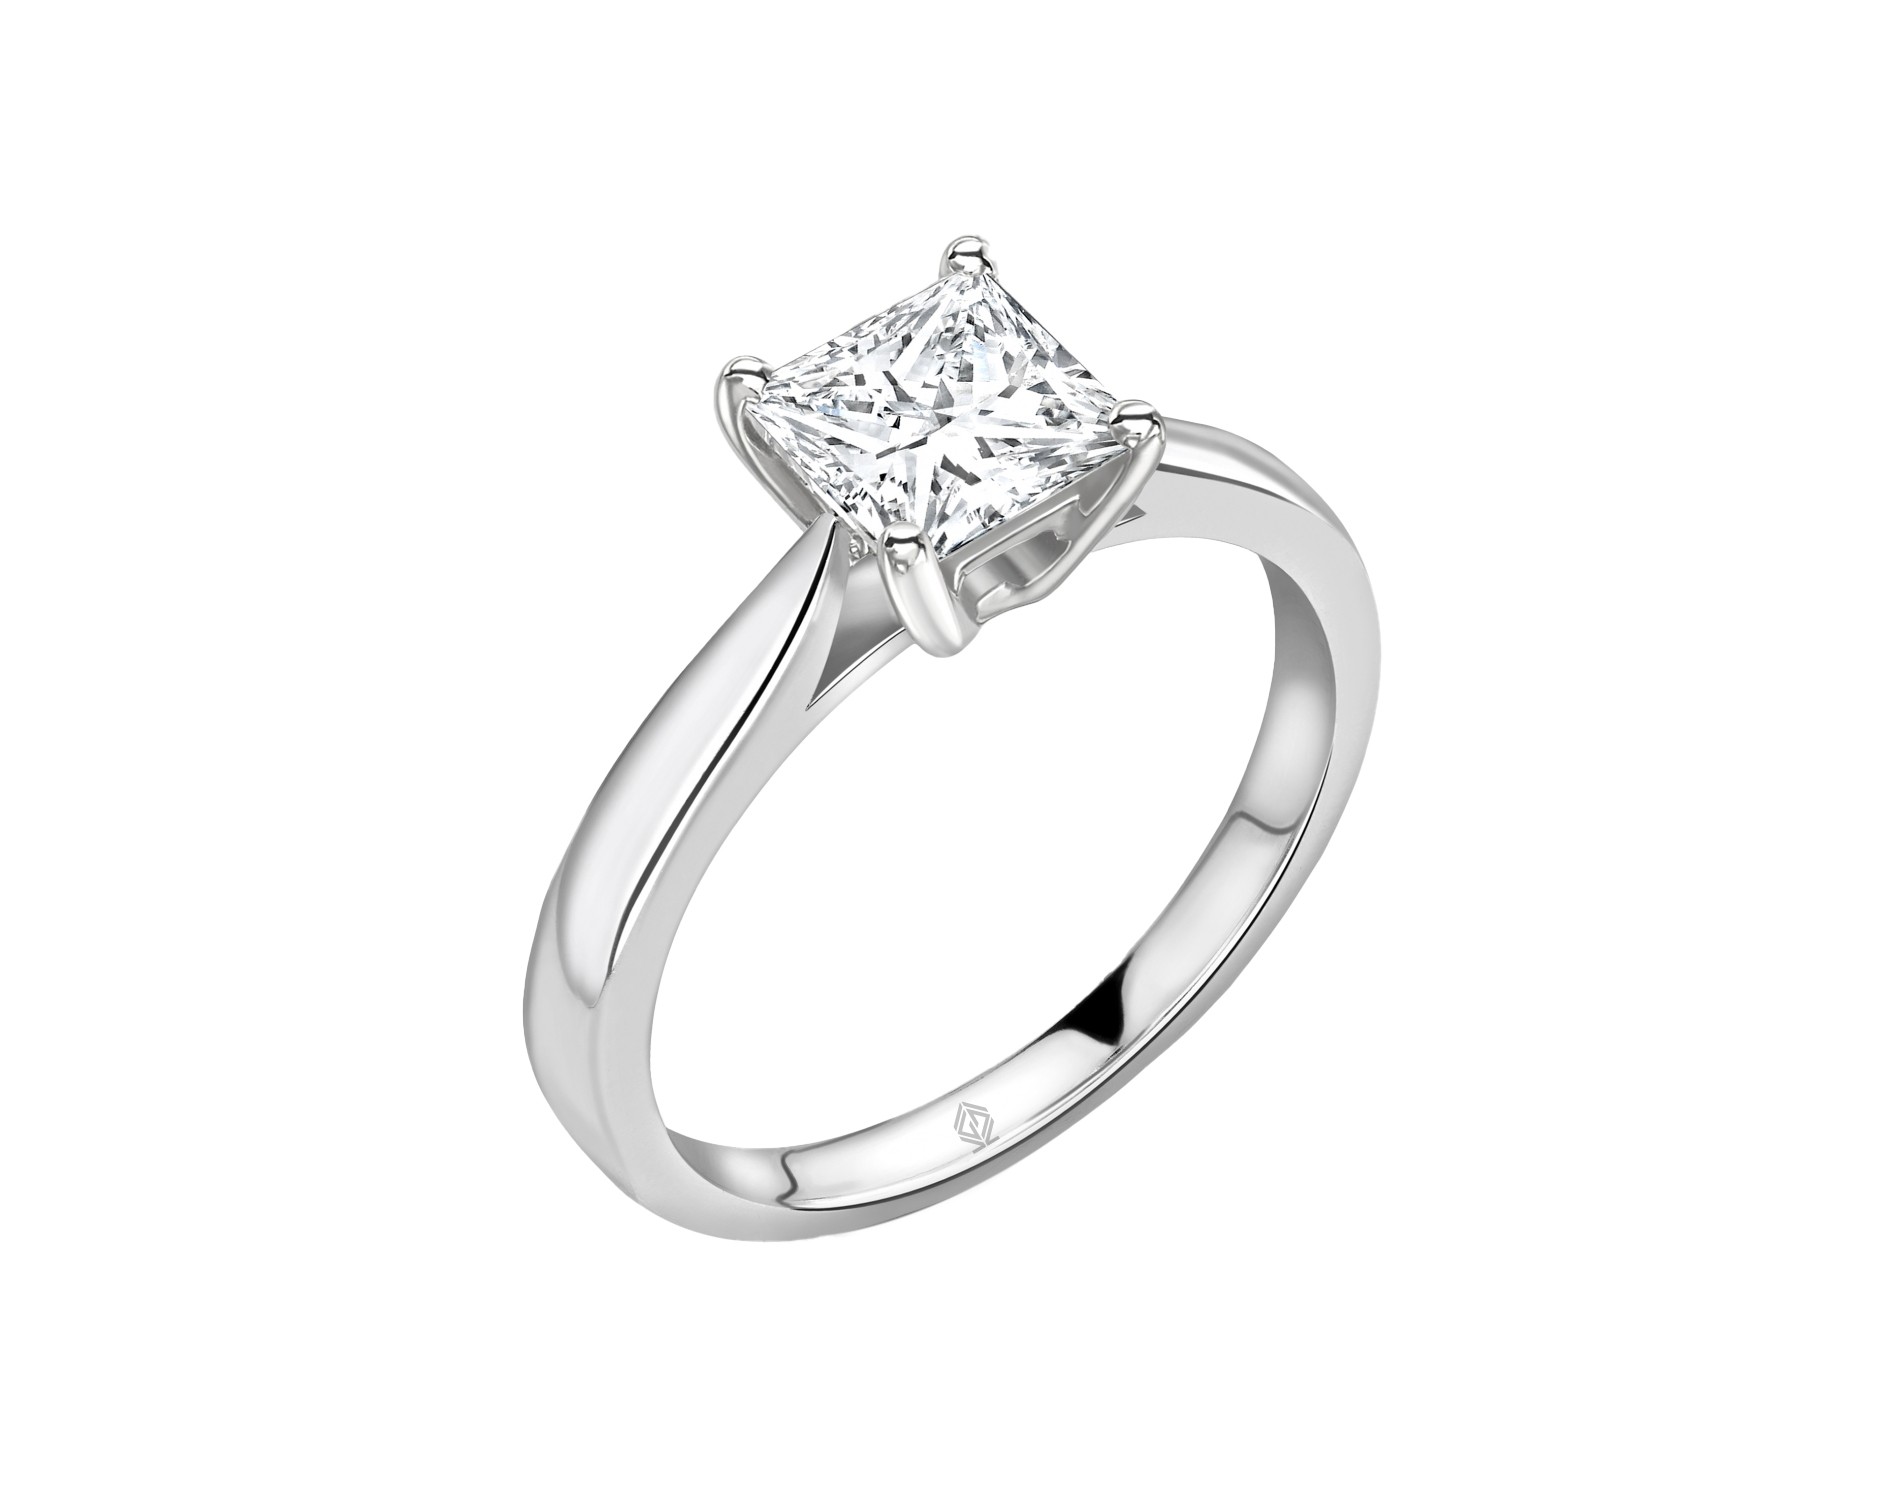 18K WHITE GOLD GOLD 4 PRONGS SOLITAIRE PRINCESS CUT DIAMOND ENGAGEMENT RING